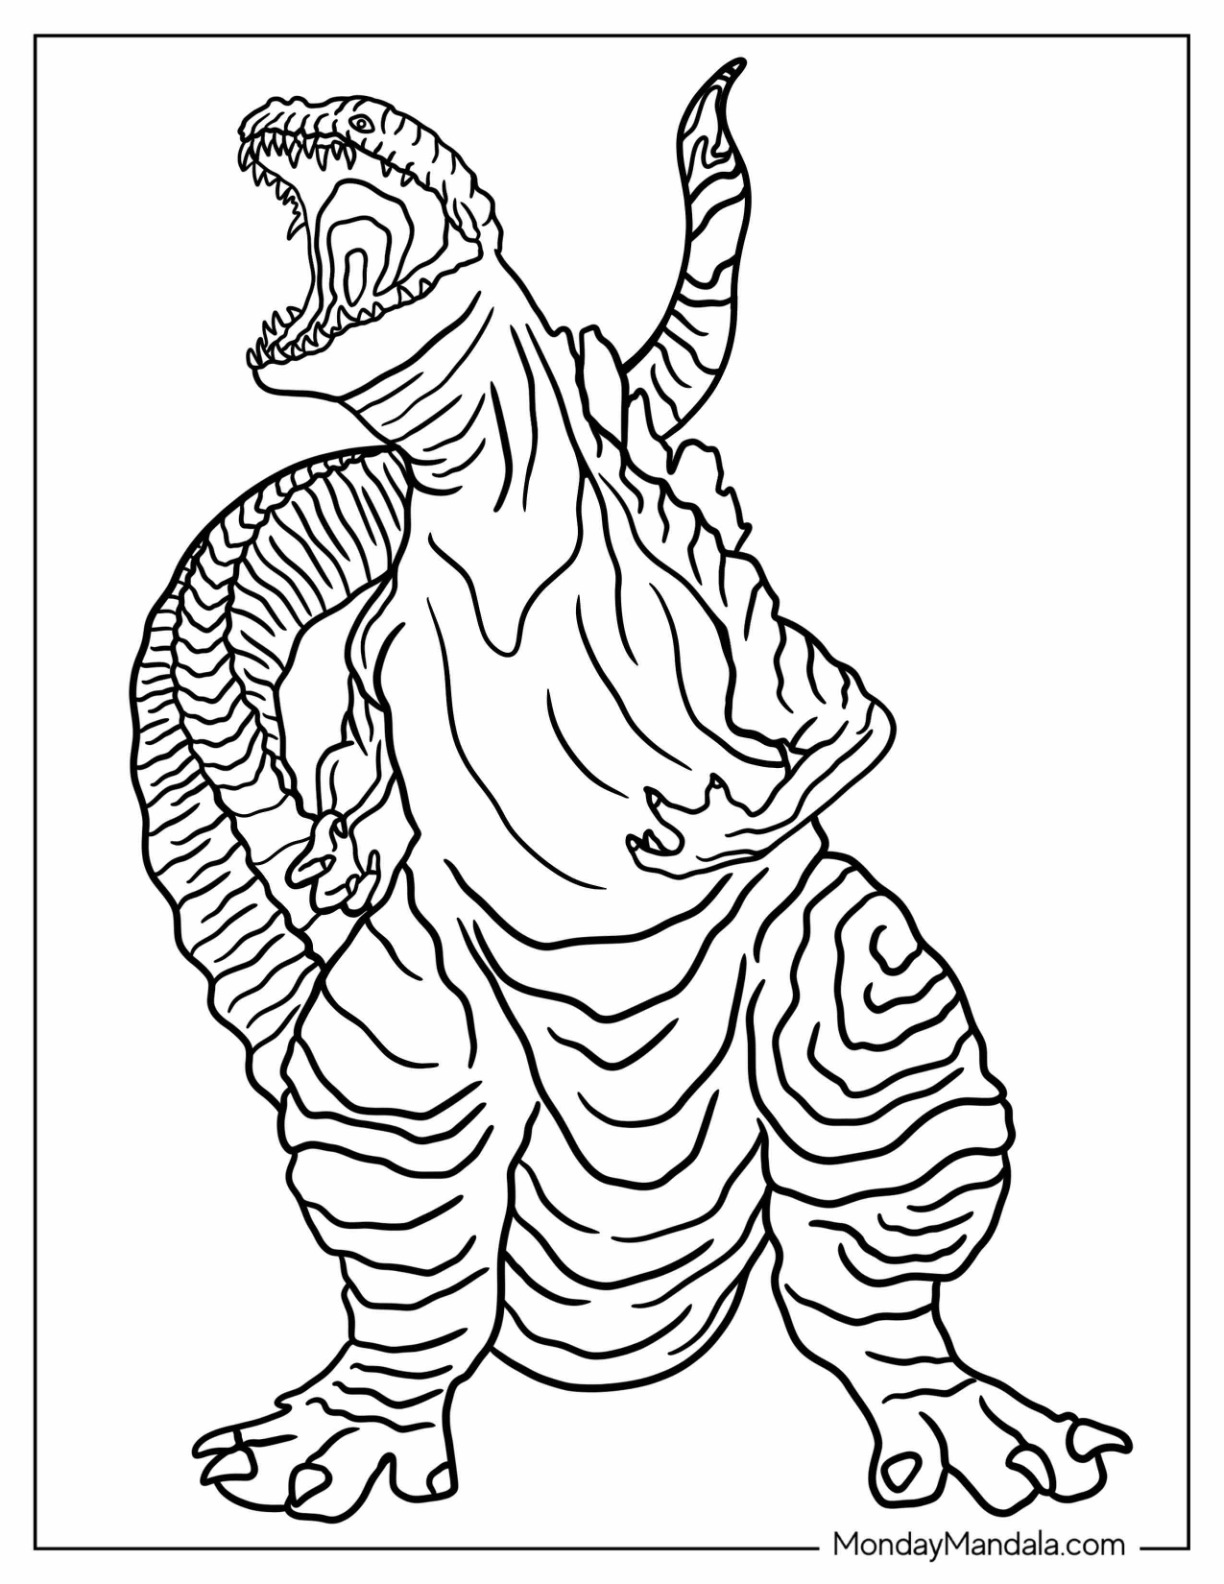 37 Legendary Godzilla Coloring Pages Printable 33